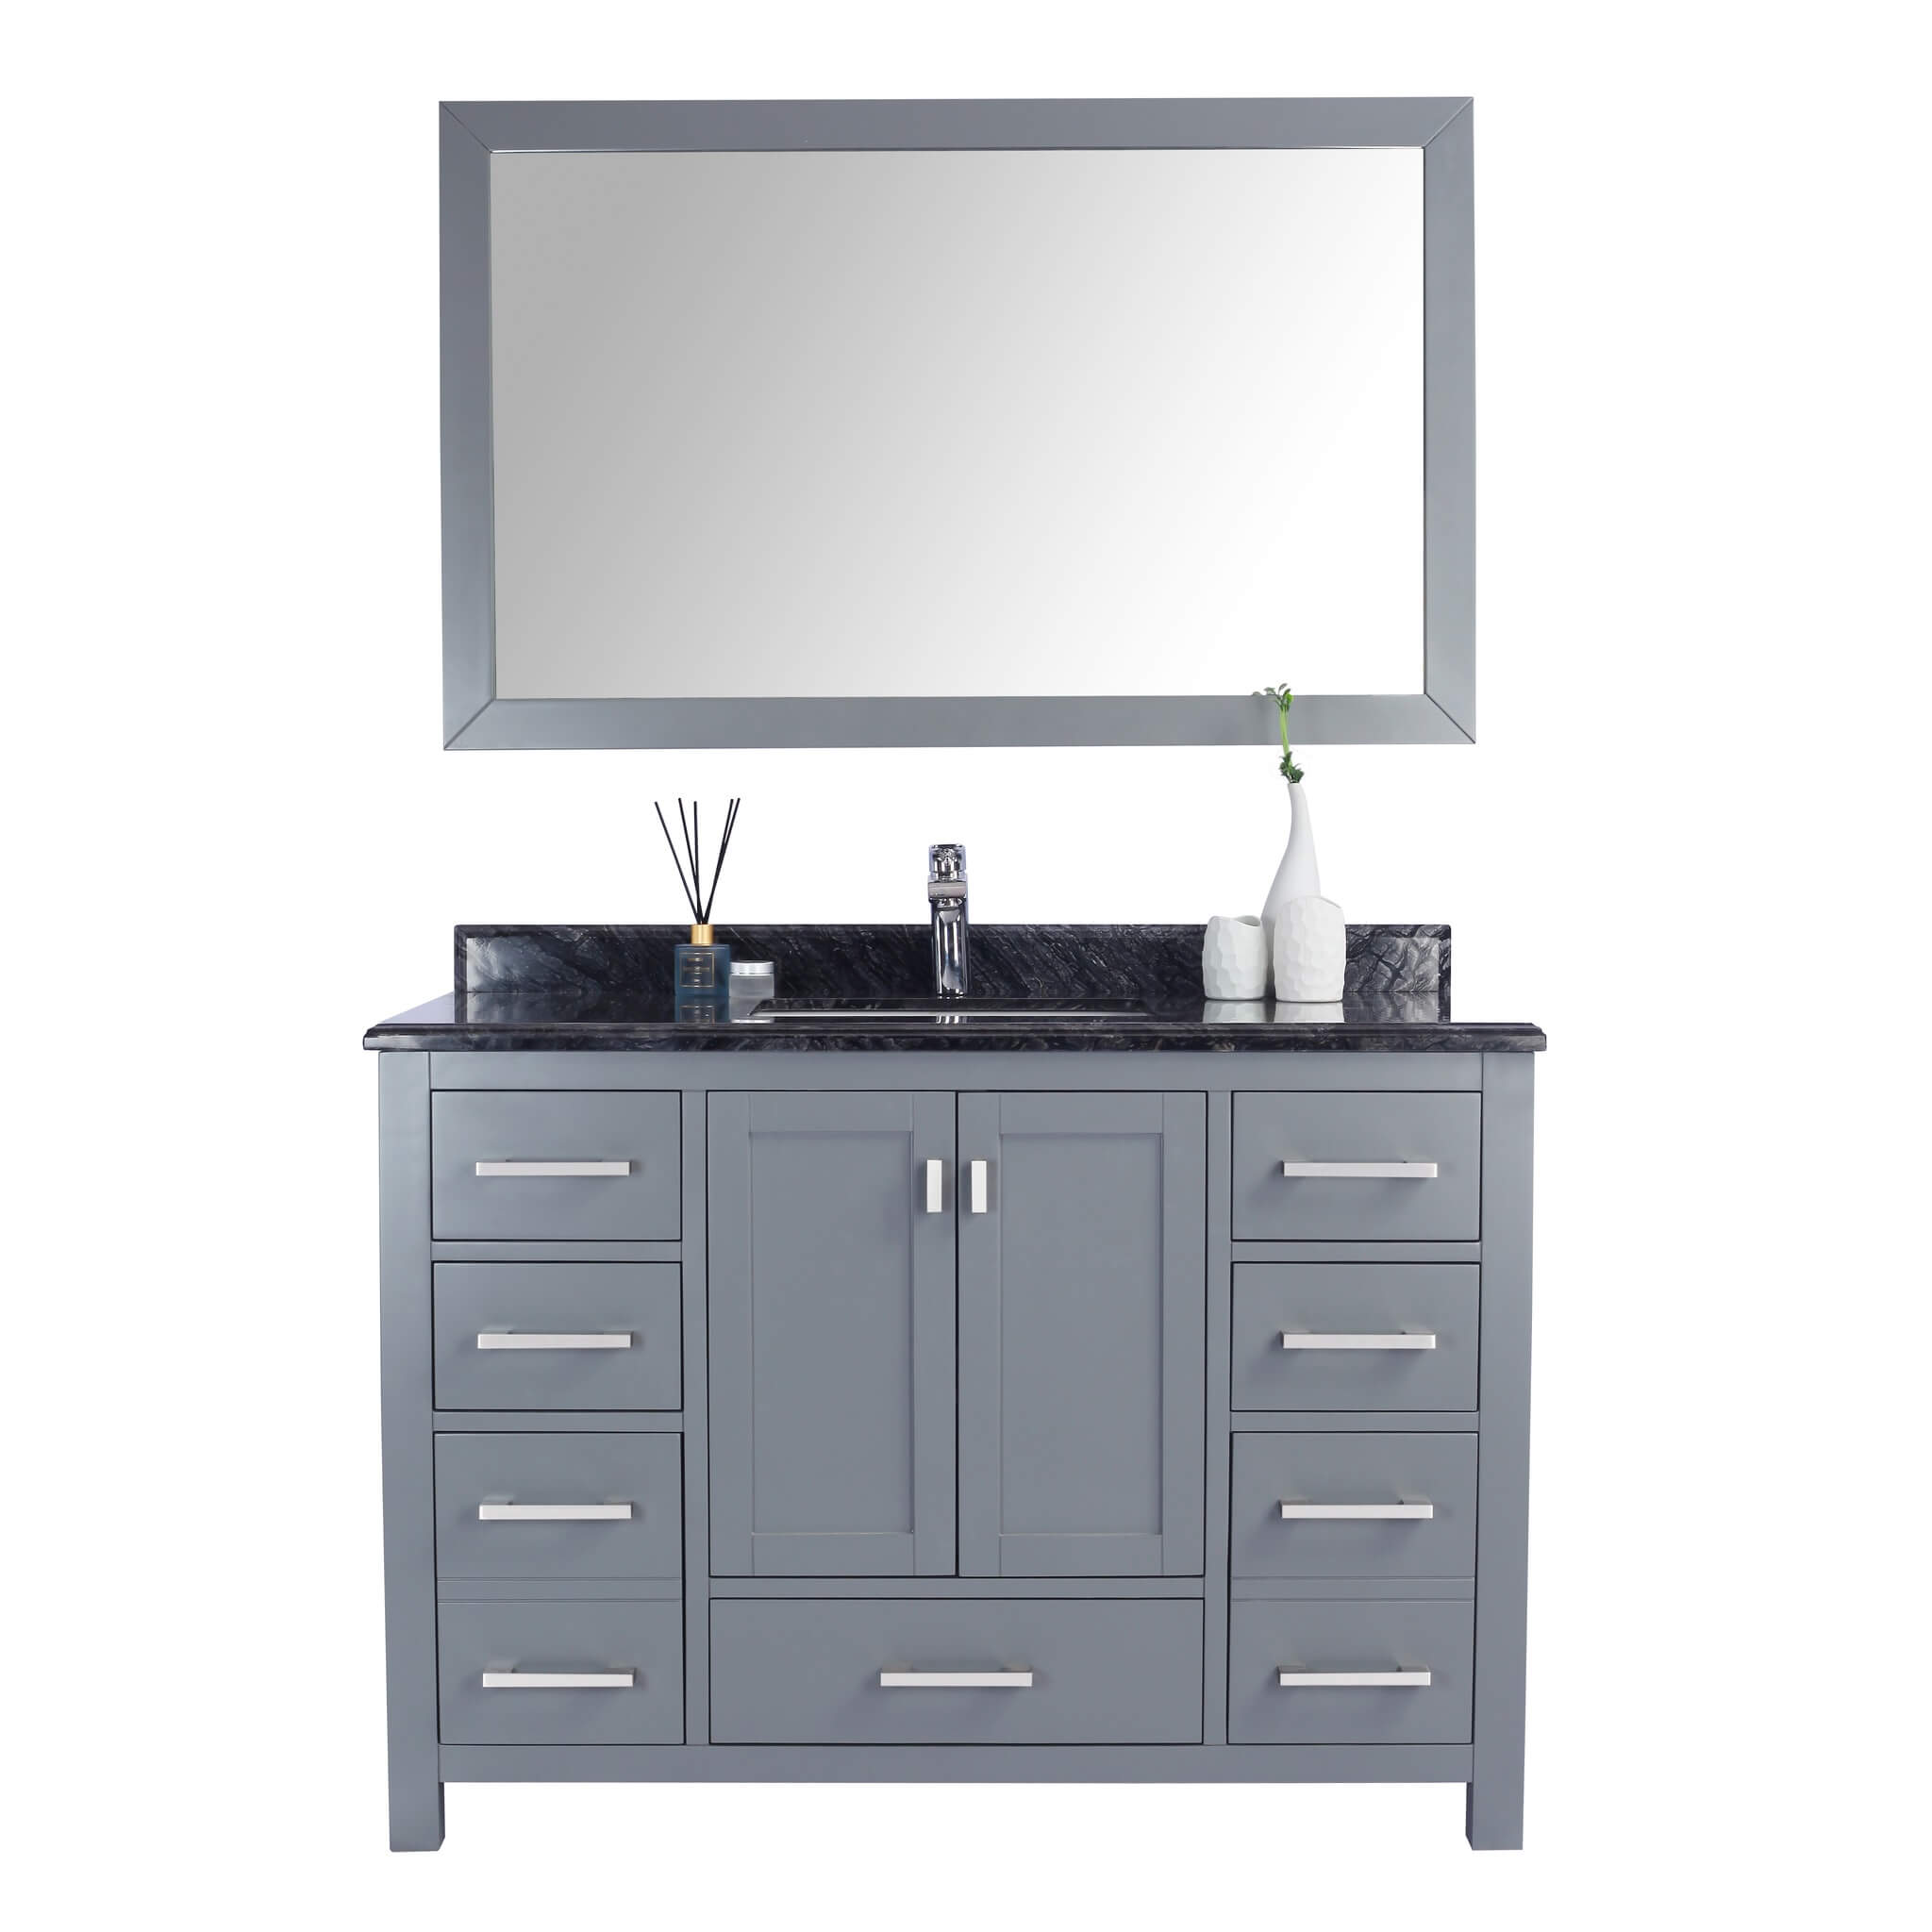 LAVIVA Wilson 313ANG-48G-BW 48" Single Bathroom Vanity in Grey with Black Wood Marble, White Rectangle Sink, Front View